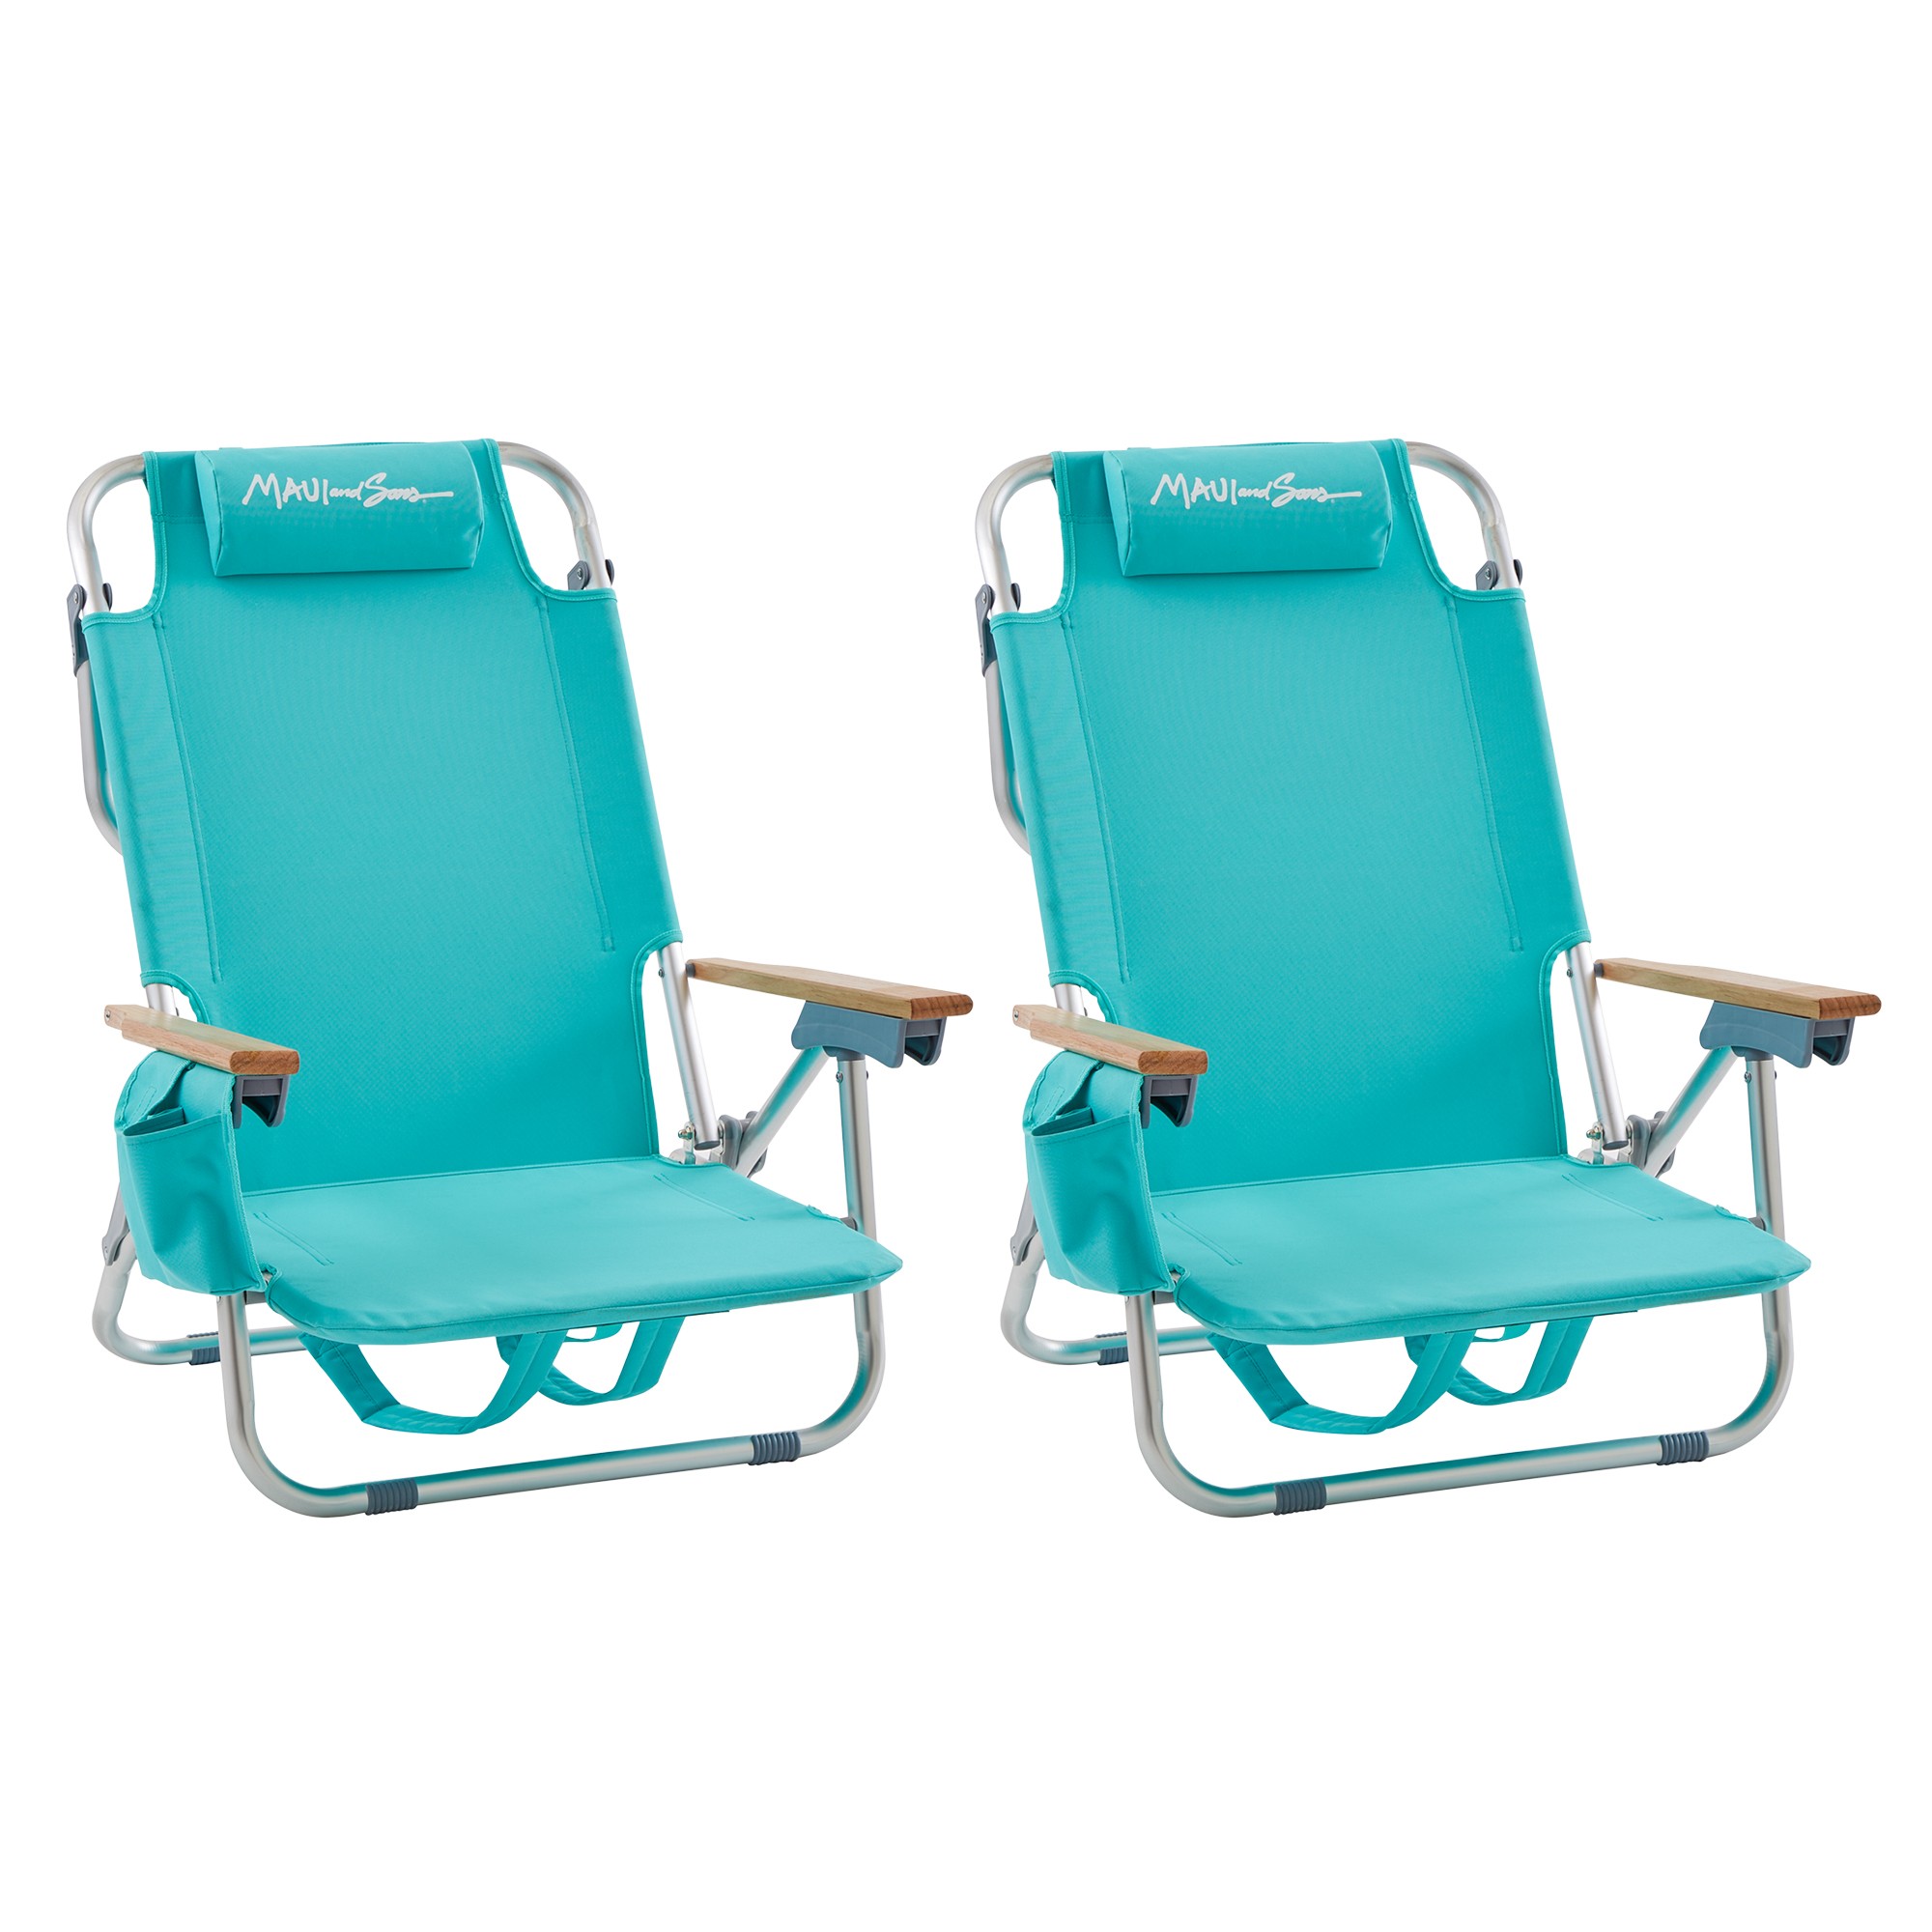 Maui and Sons Deluxe Backpack Beach Chair Set of 2 with 5 Comfort Positions and More